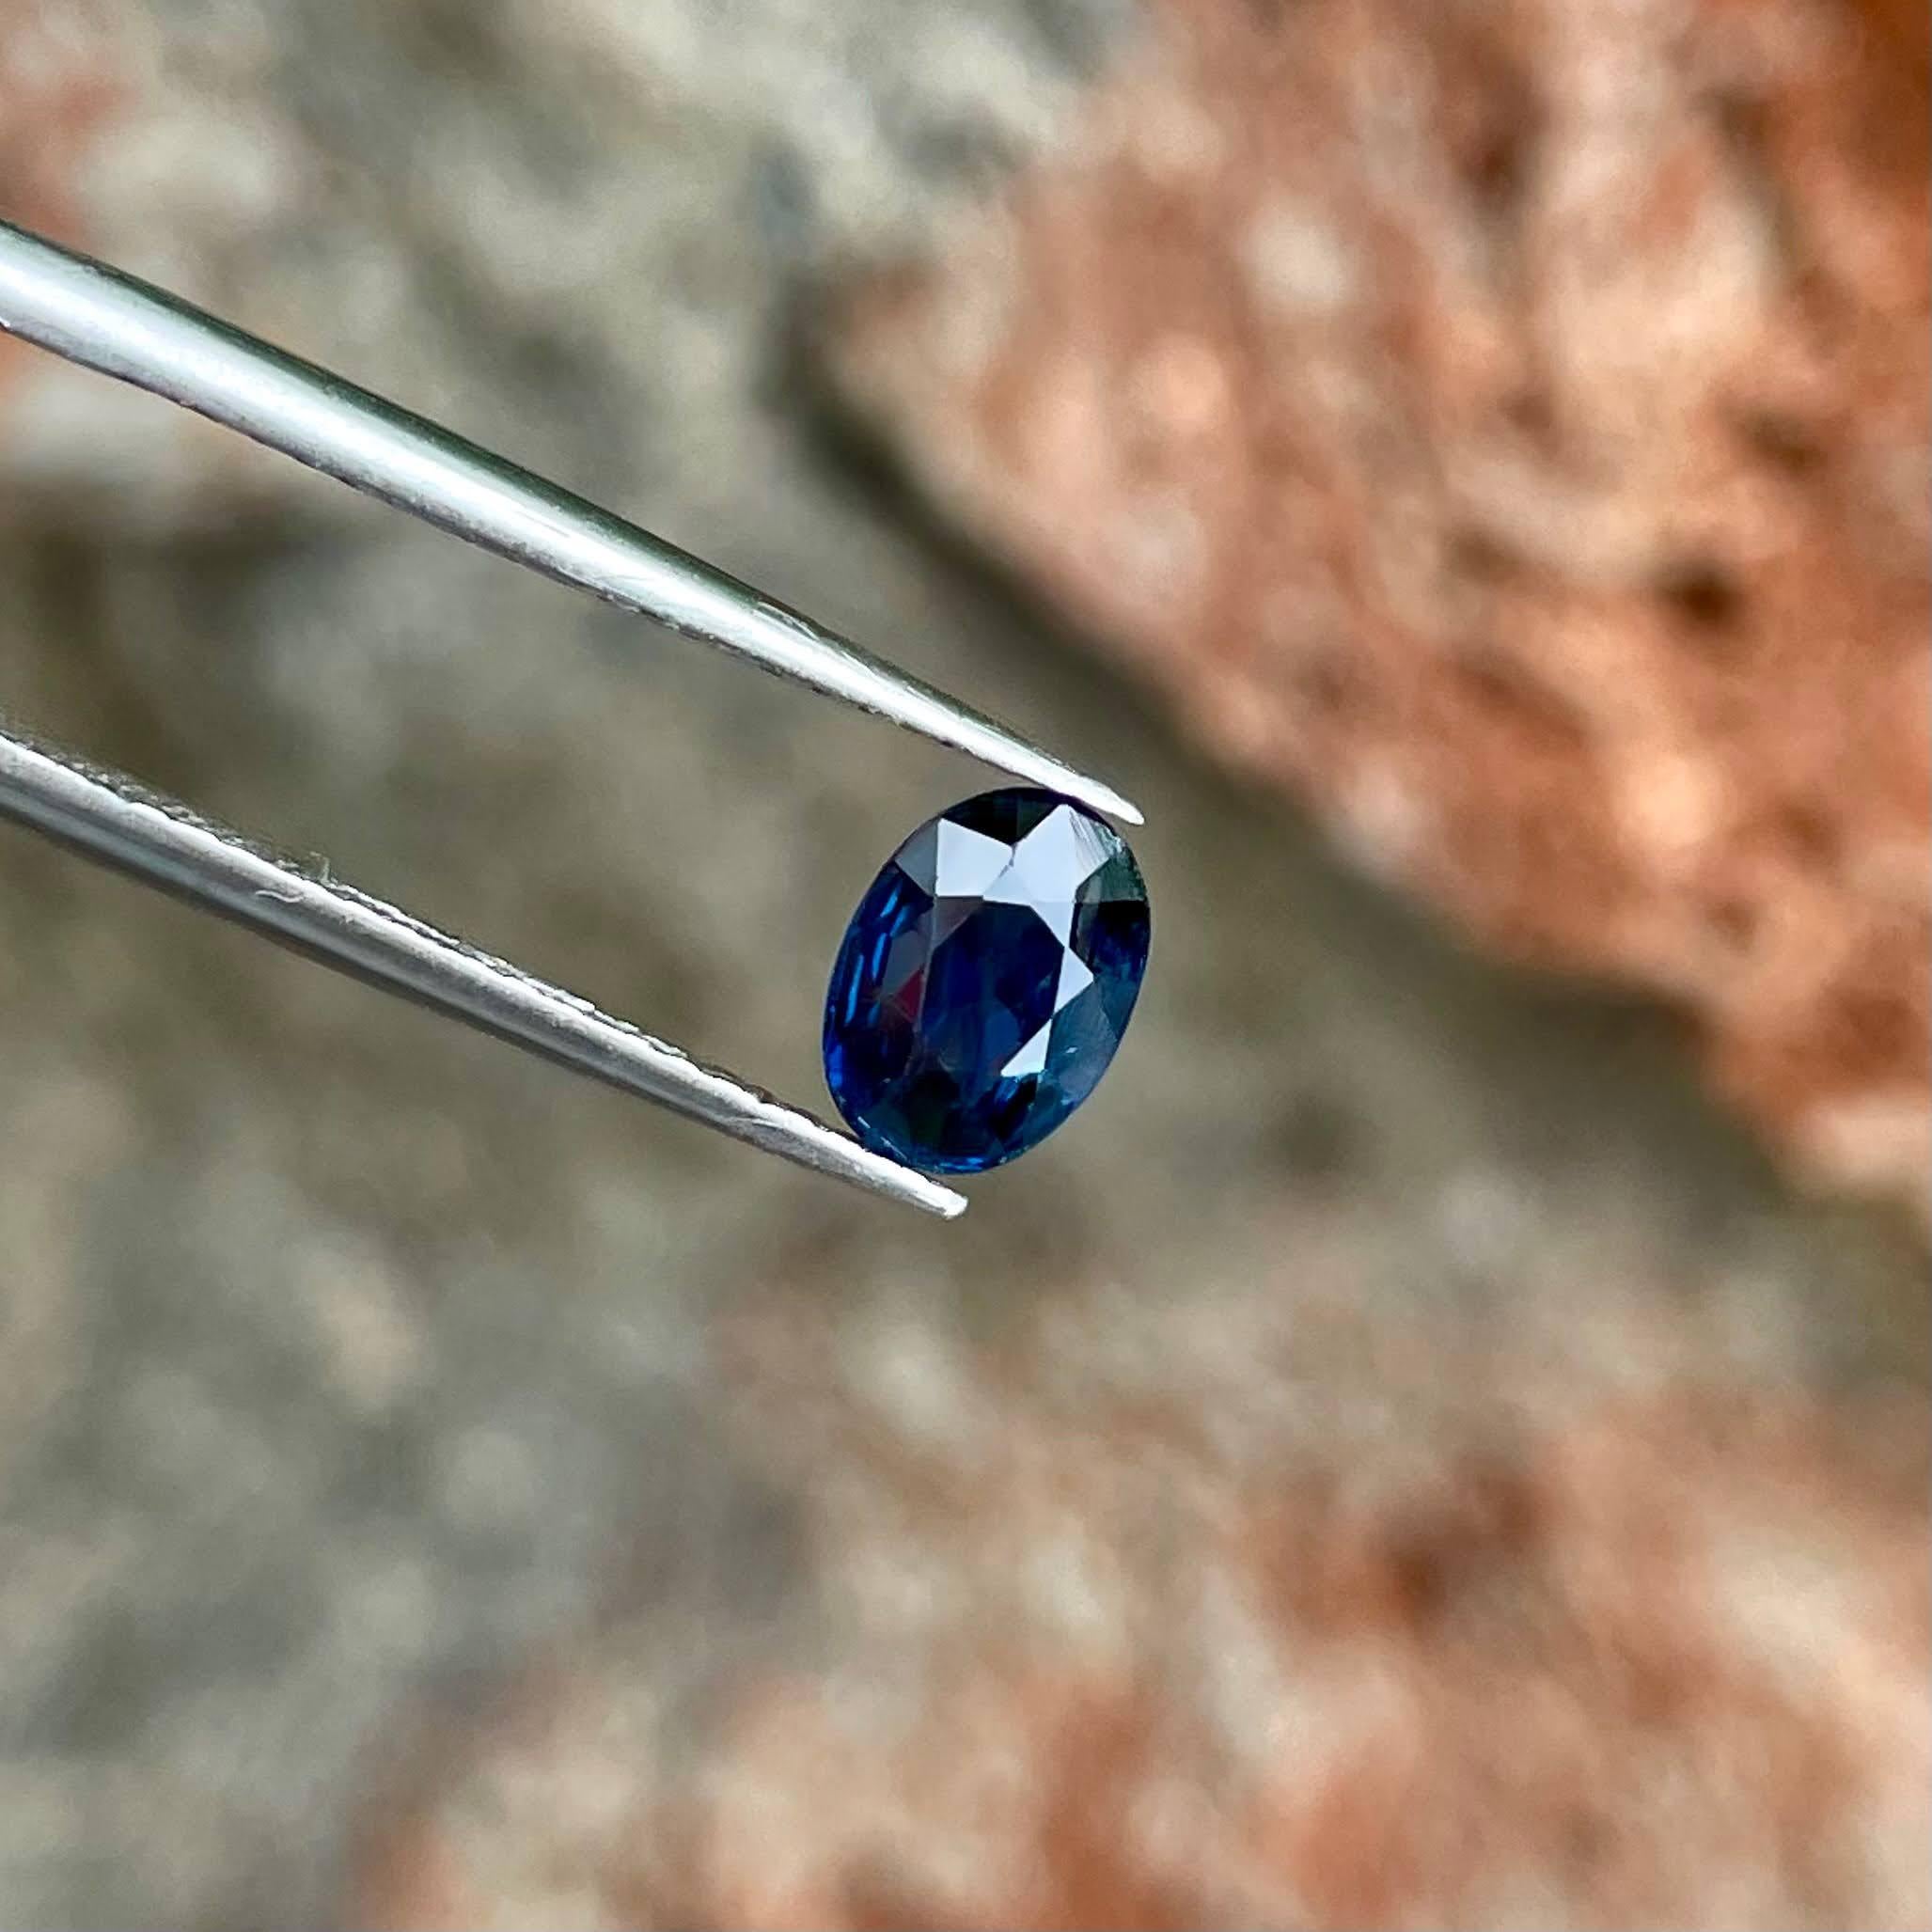 Weight 0.90 carats 
Dimensions 6.85x5.0x3.0 mm
Treatment Heated 
Clarity VVS
Origin Madagascar 
Shape oval
Cut Faceted 



This exquisite 0.90 carat deep blue sapphire stone boasts an elegant oval cut, showcasing the brilliance of Madagascar's